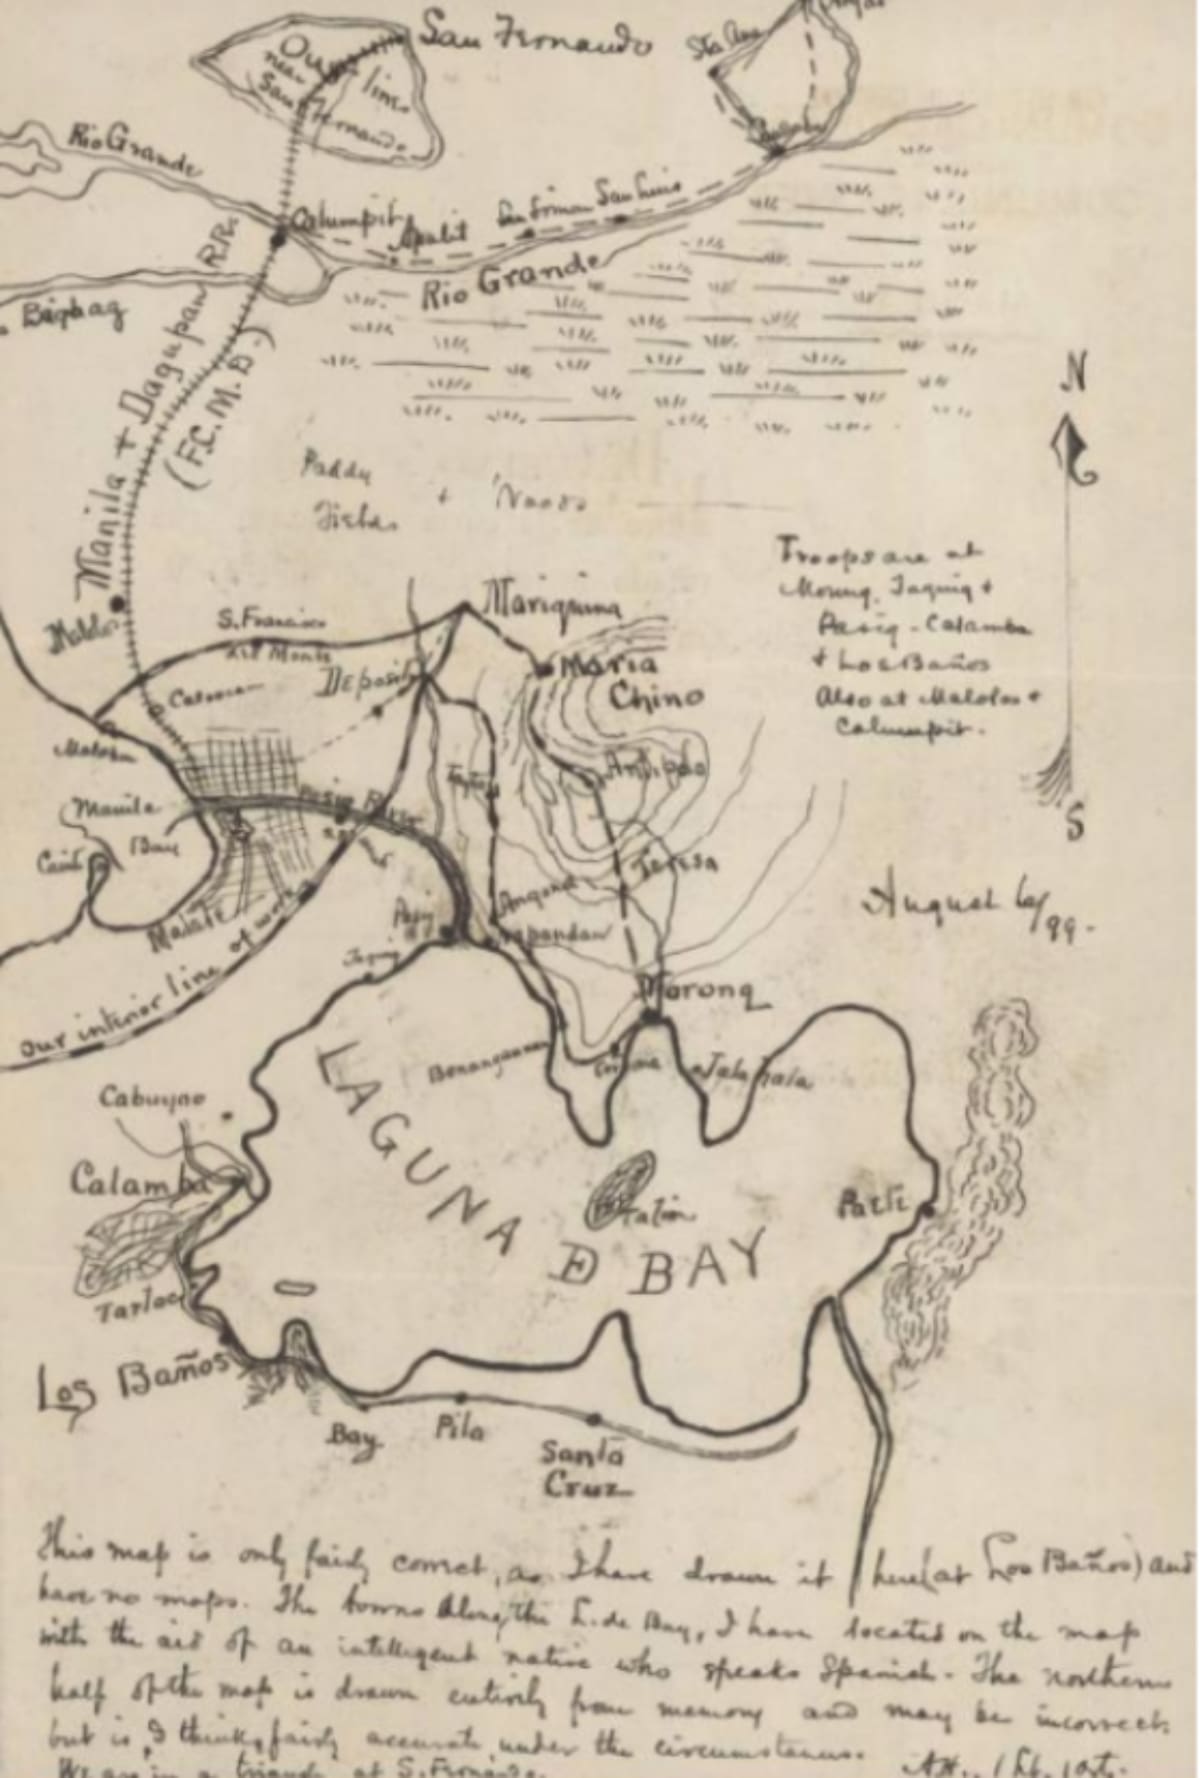 A hand drawn map from the late nineteenth century